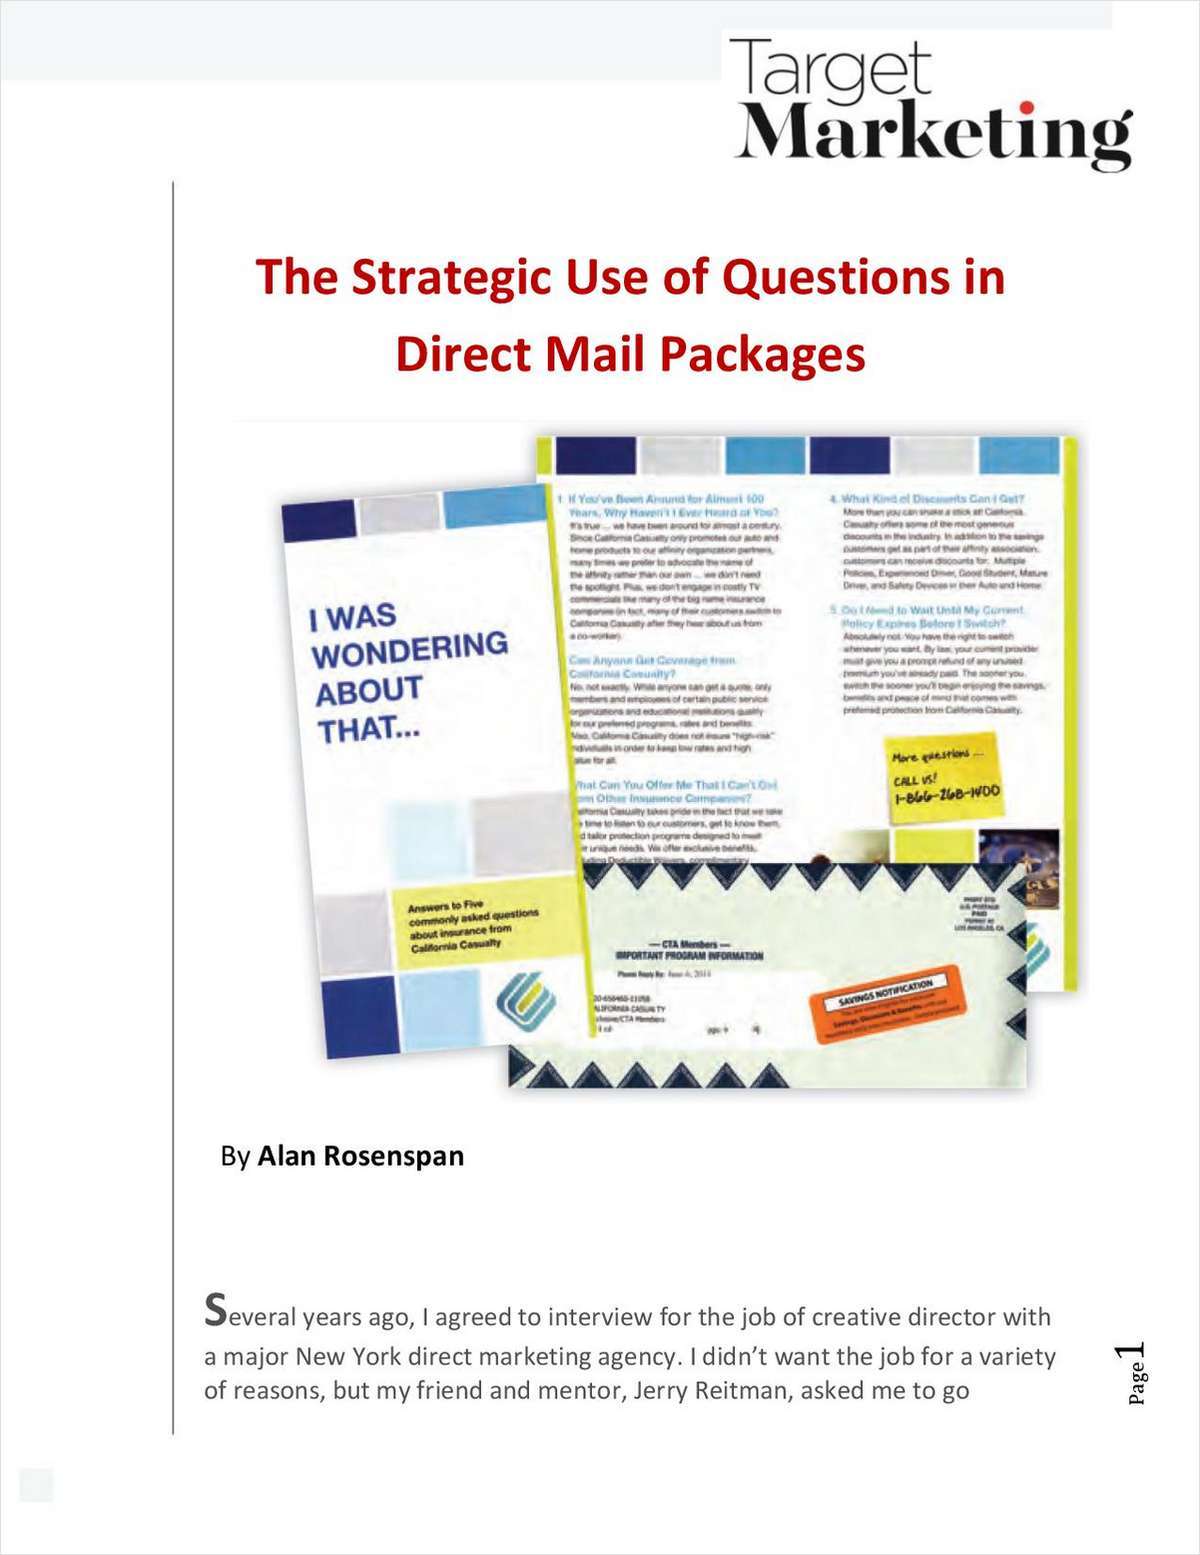 The Strategic Use of Questions in Direct Mail Packages